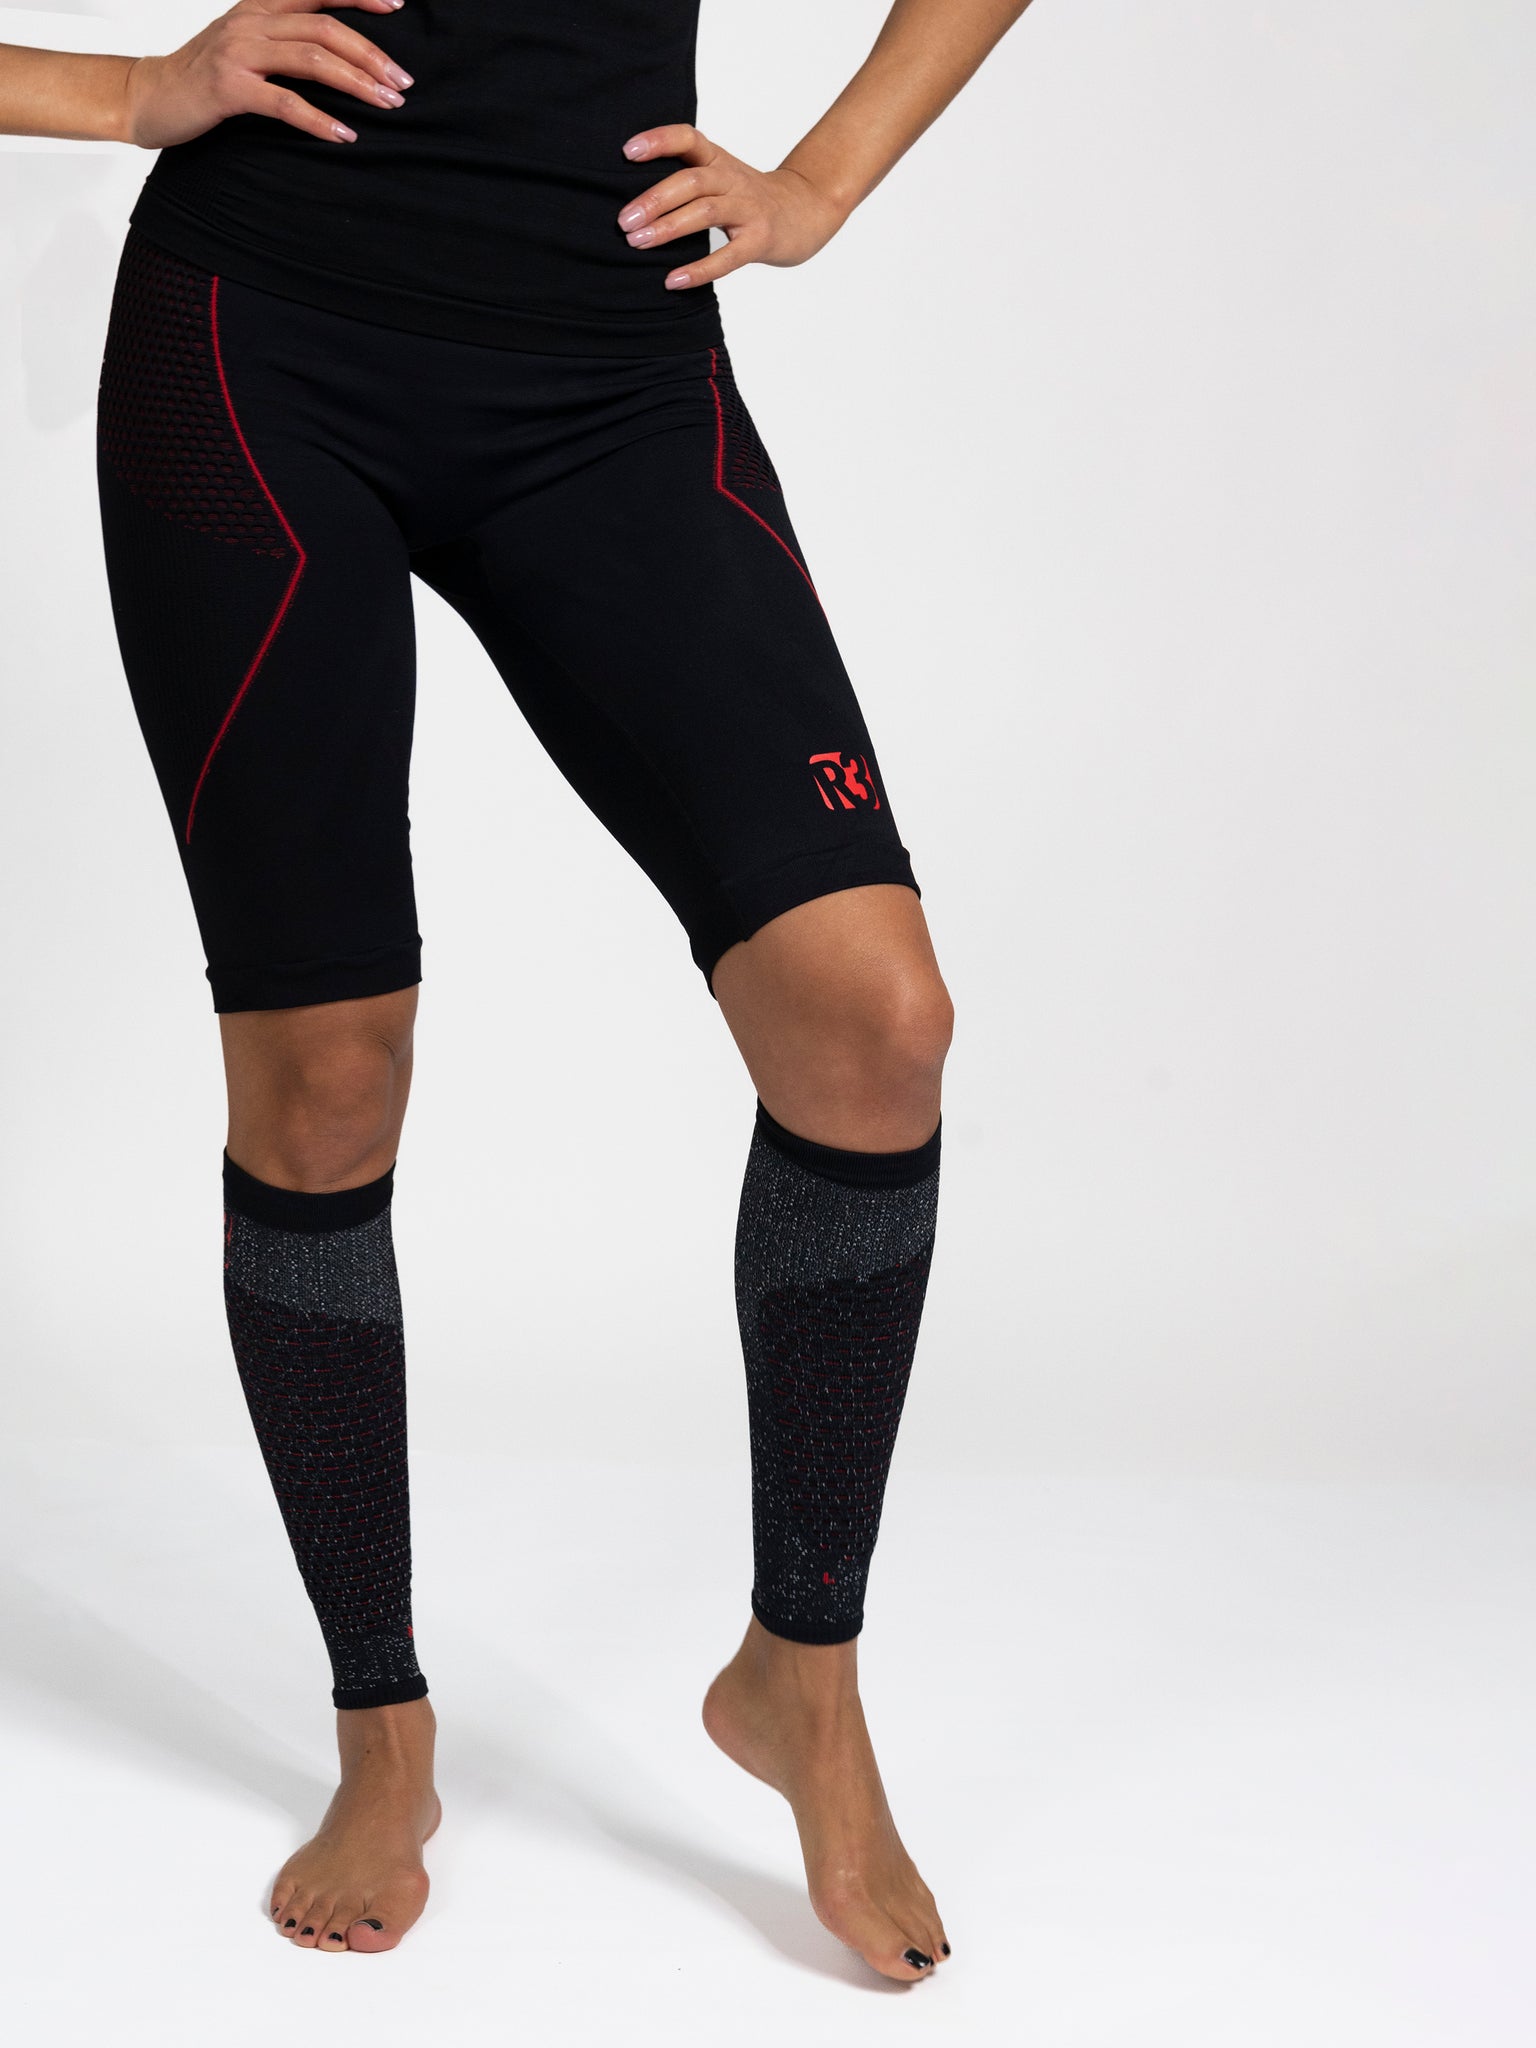 Gambale Calf Compression Unisex Black/Red